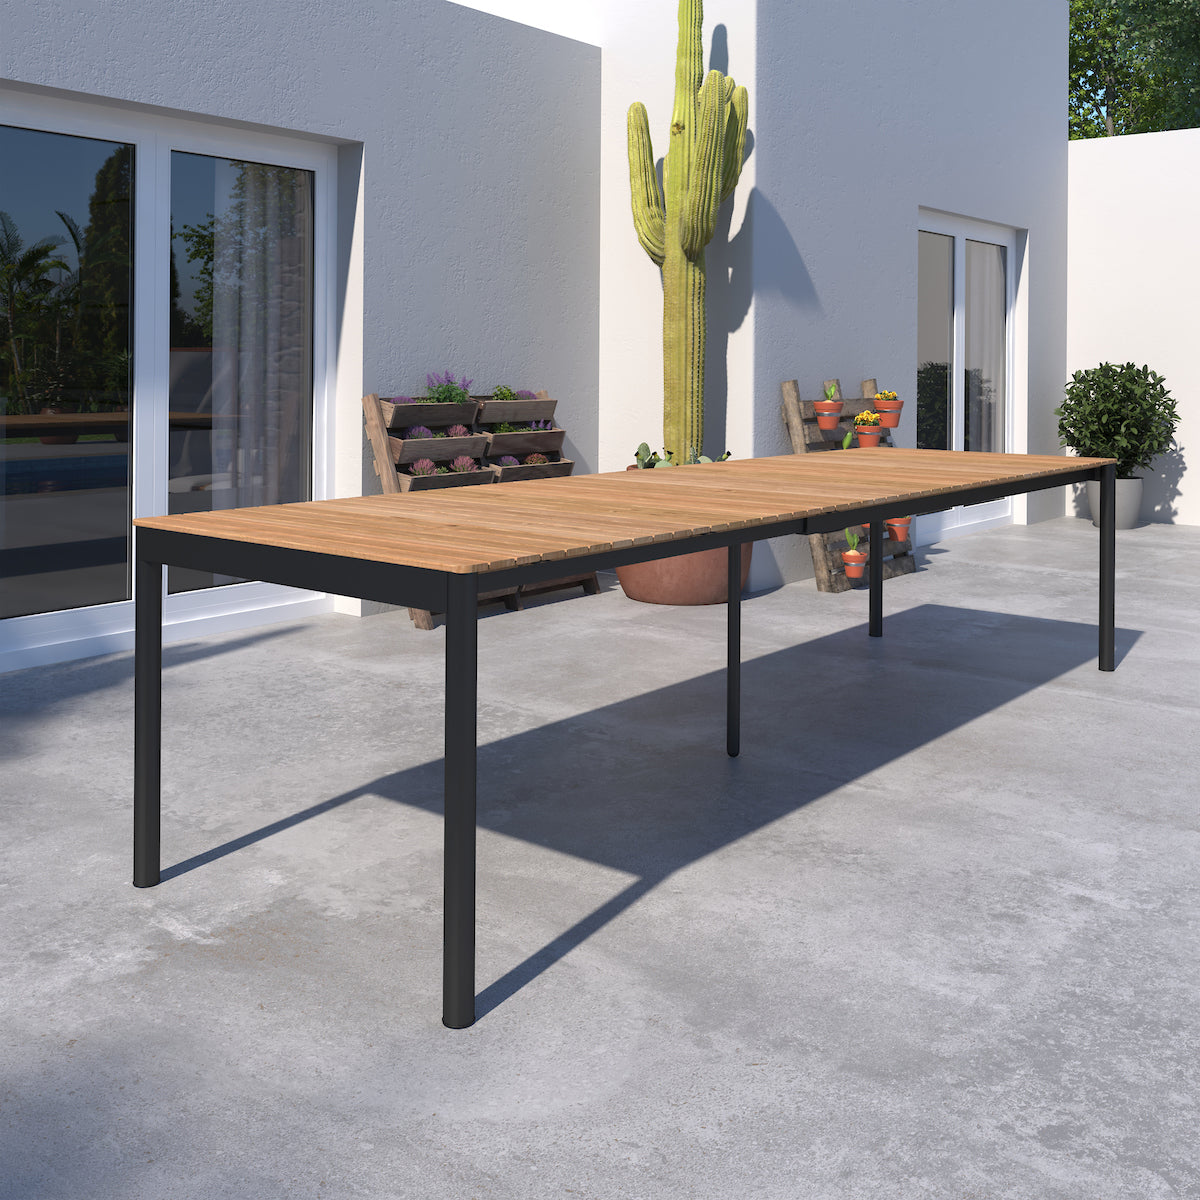 $1999 NOW $1499 *BRAND NEW*  Rectangular Extendable 100% FSC Certified Teak Wood Outdoor Dining Table